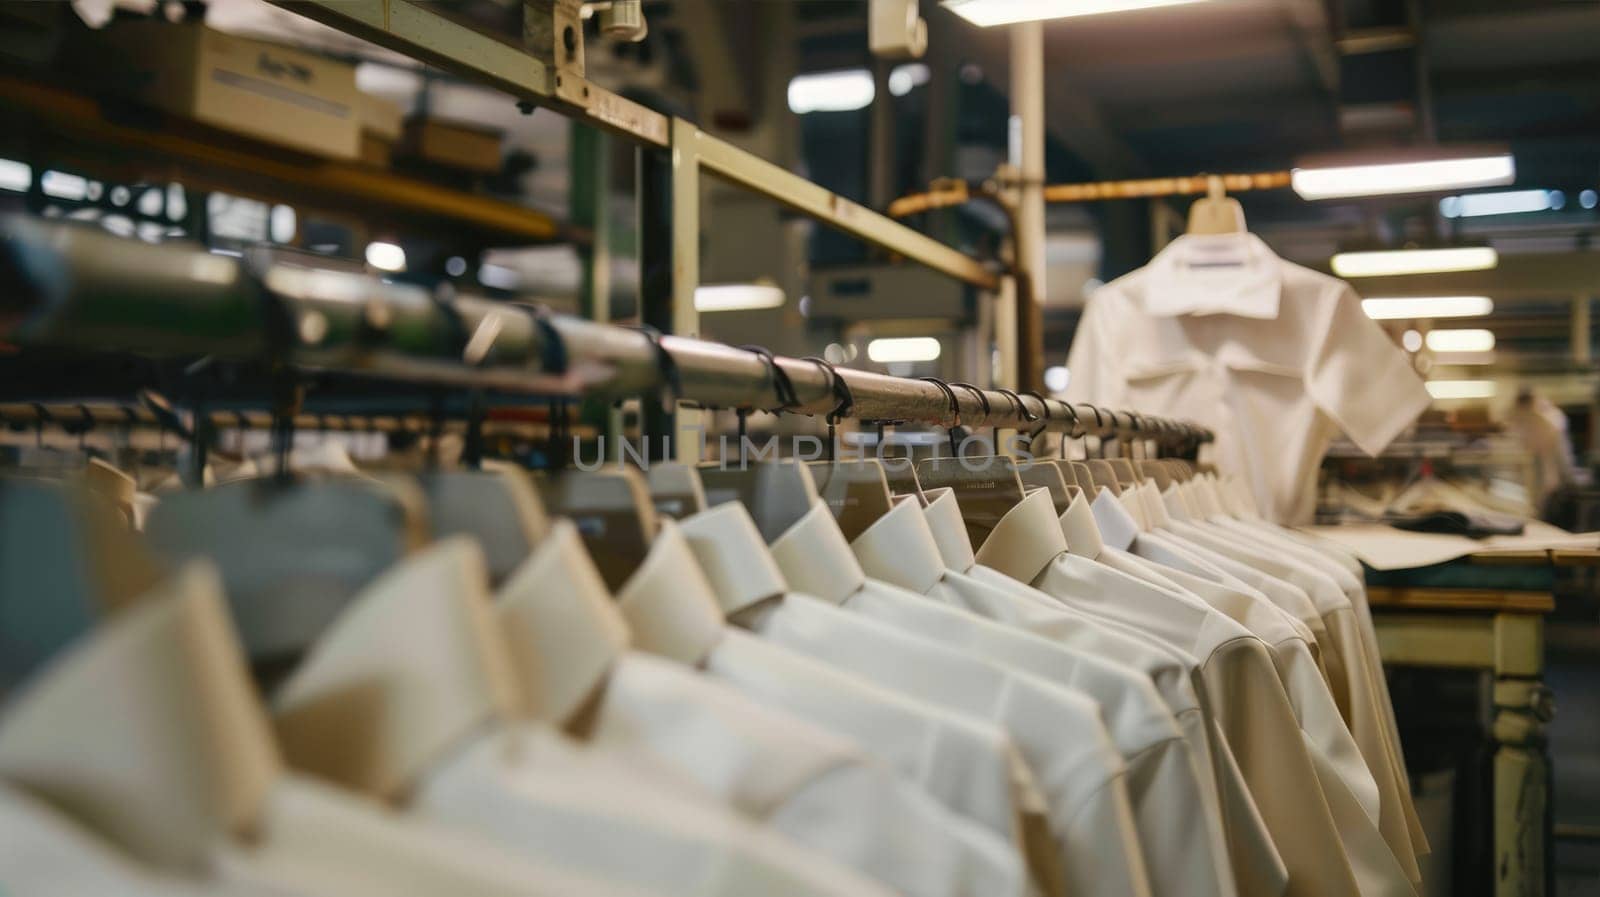 A variety of shirts are displayed on racks in a factory warehouse, showcasing the mass production process using machines and engineering techniques AI